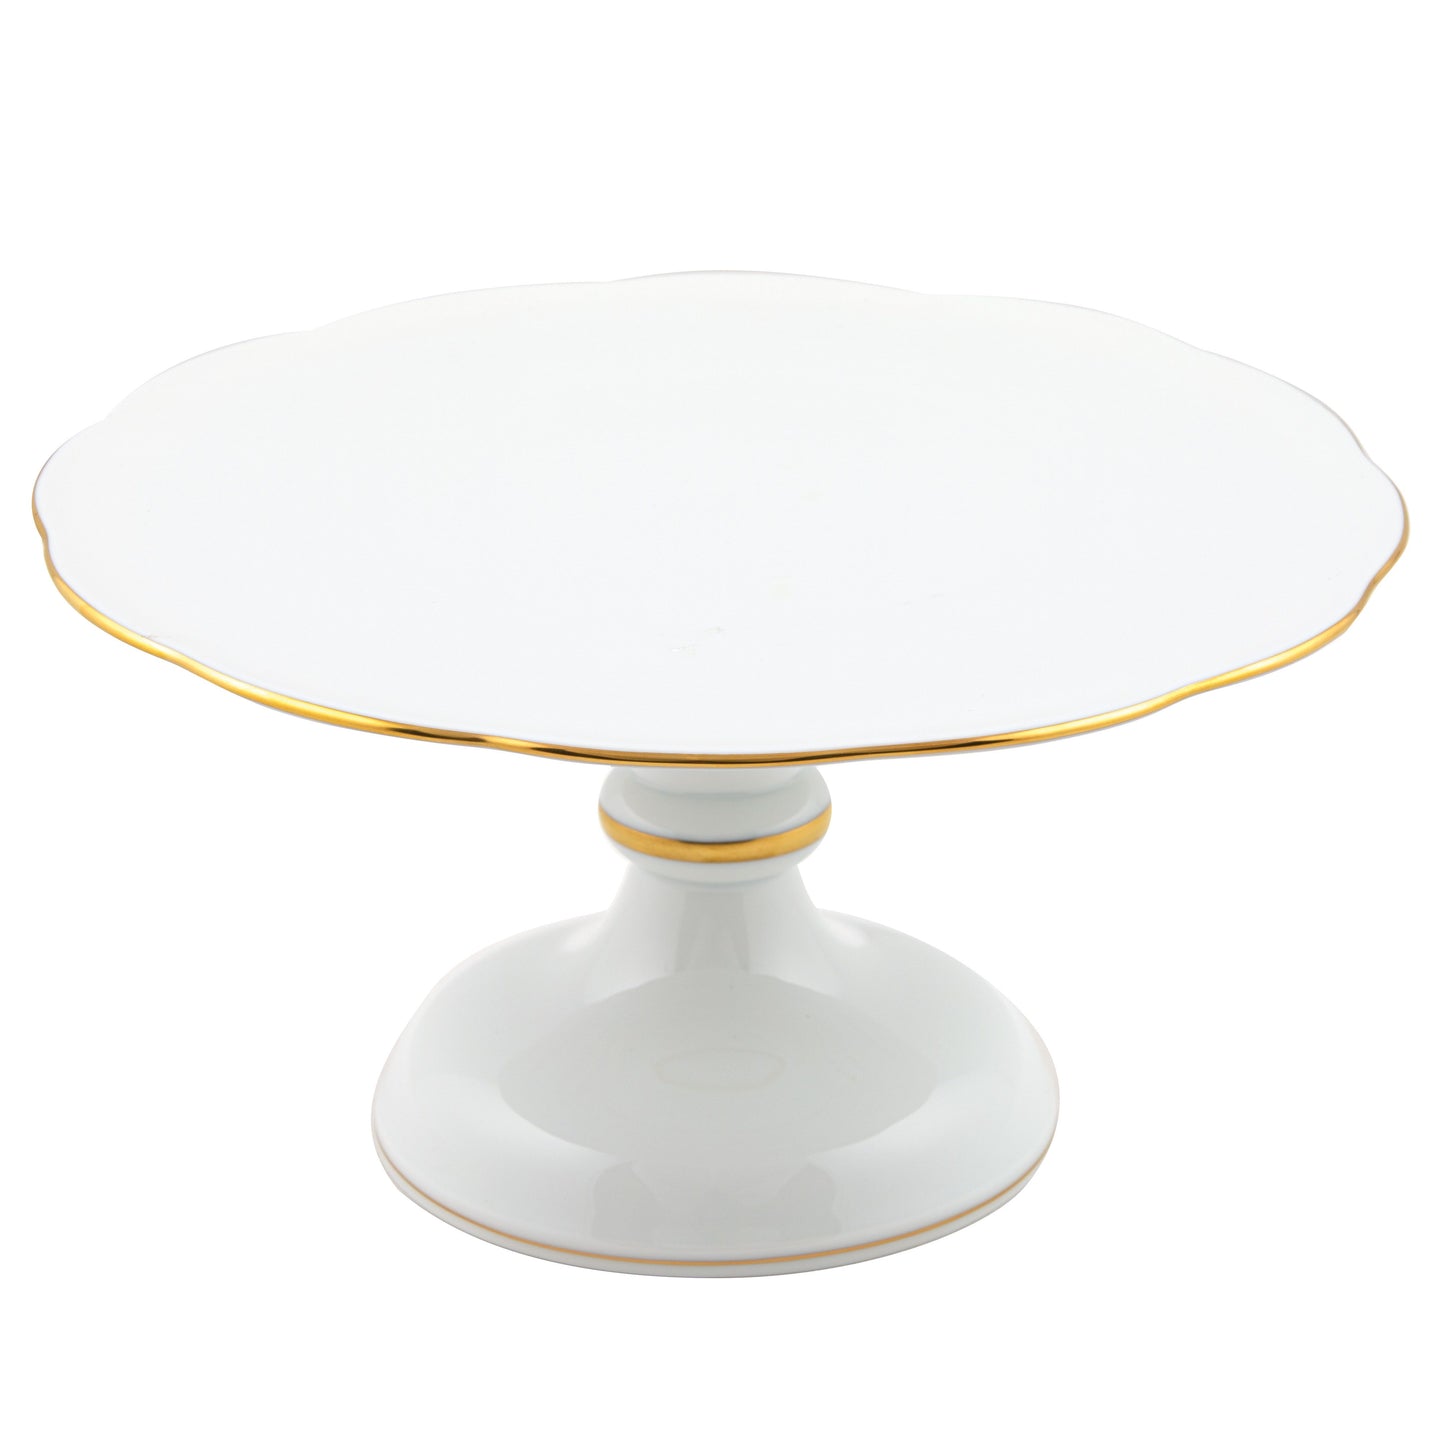 Herend Golden Edge Footed Cake Stand